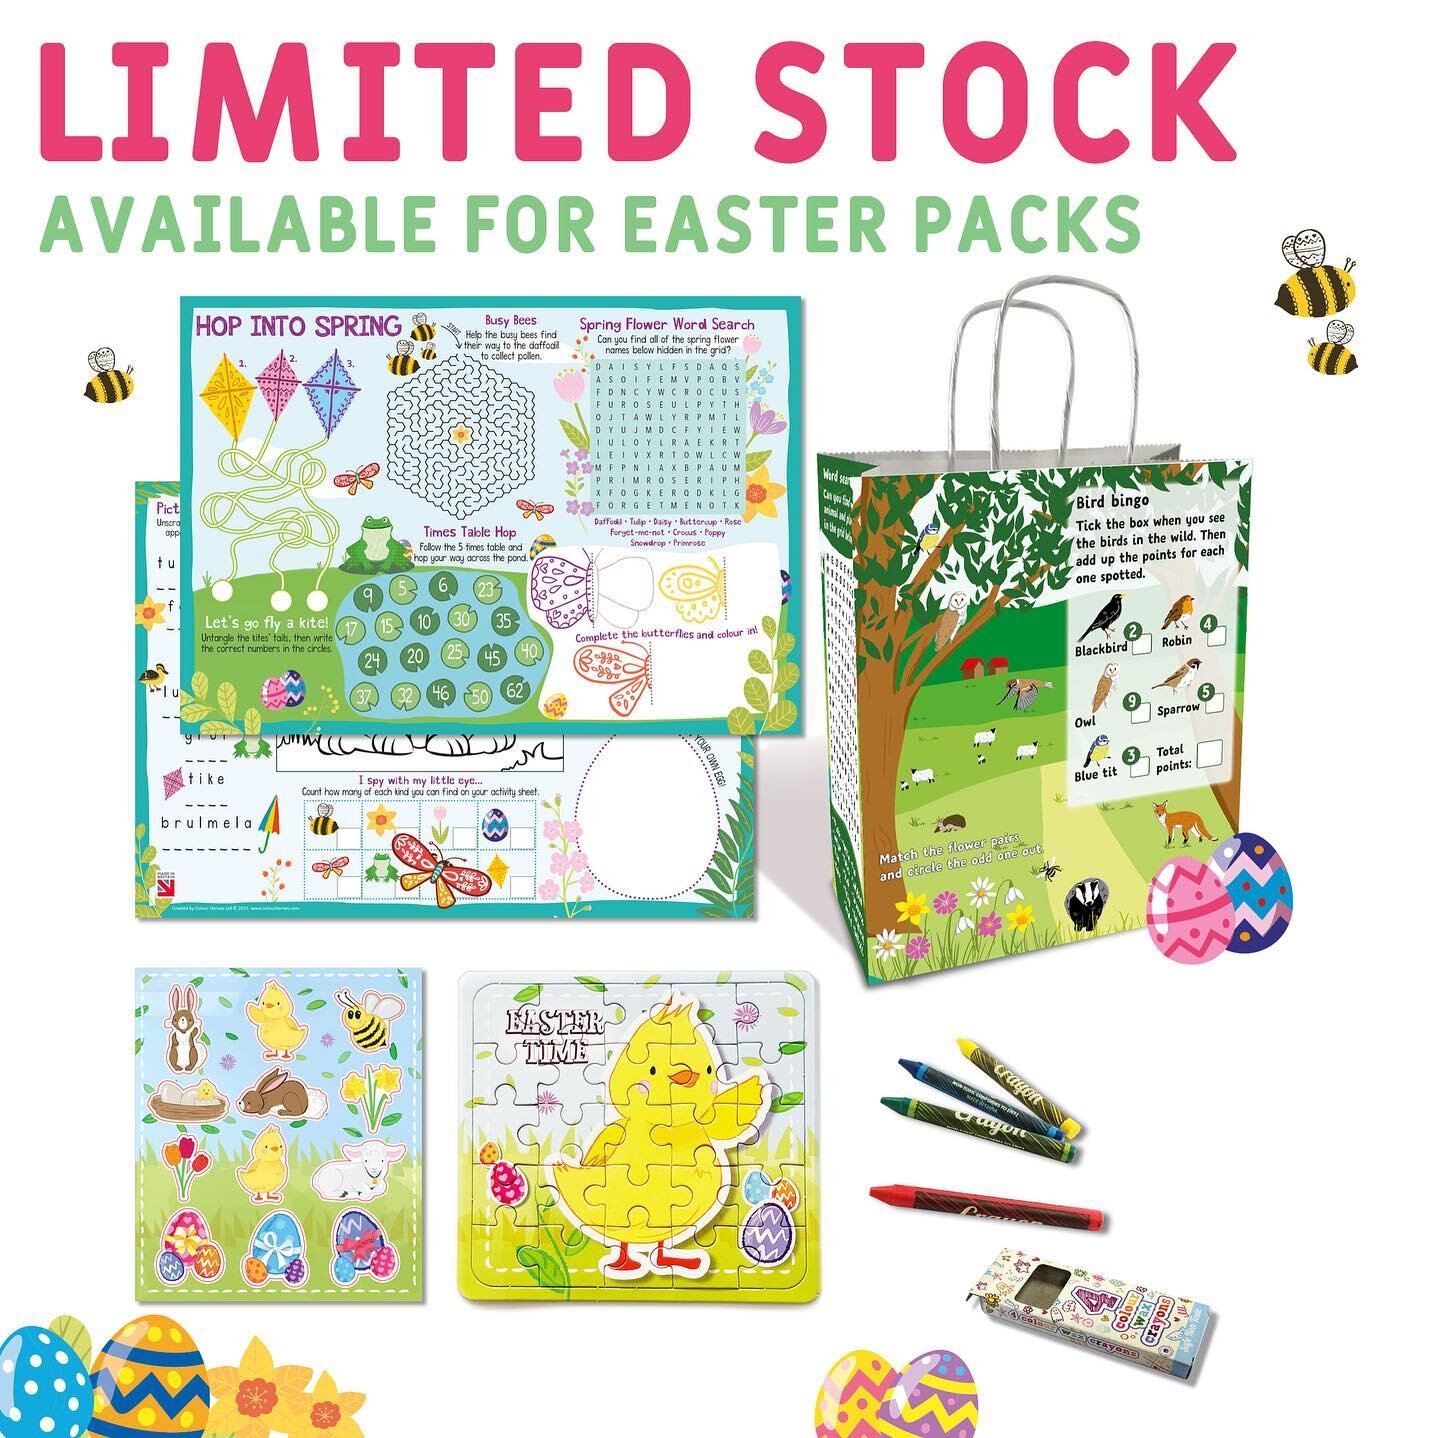 We have limited stock available for this years Easter packs! Our fun filled children&rsquo;s activity packs include:

🐣 A4 double sided activity sheet
🐰 Easter sticker sheet
🐑 Easter jigsaw
🖍️ Pack of crayons
🐥Activity bag

Order before Tuesday 